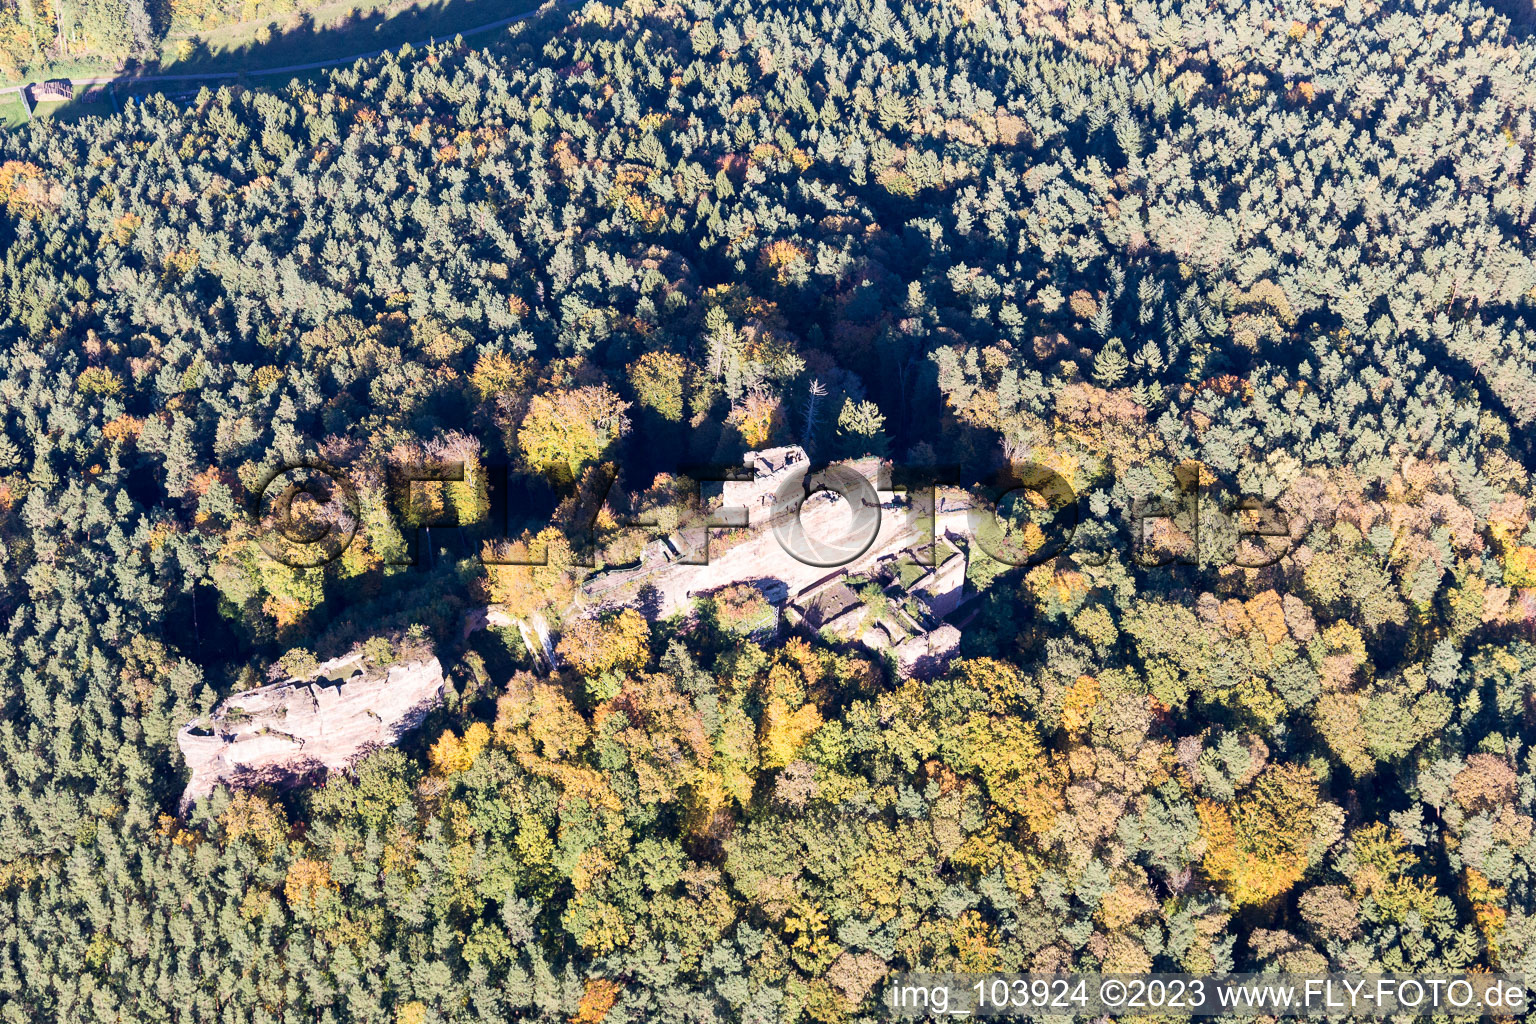 Drachenfels castle ruins in Busenberg in the state Rhineland-Palatinate, Germany from the plane